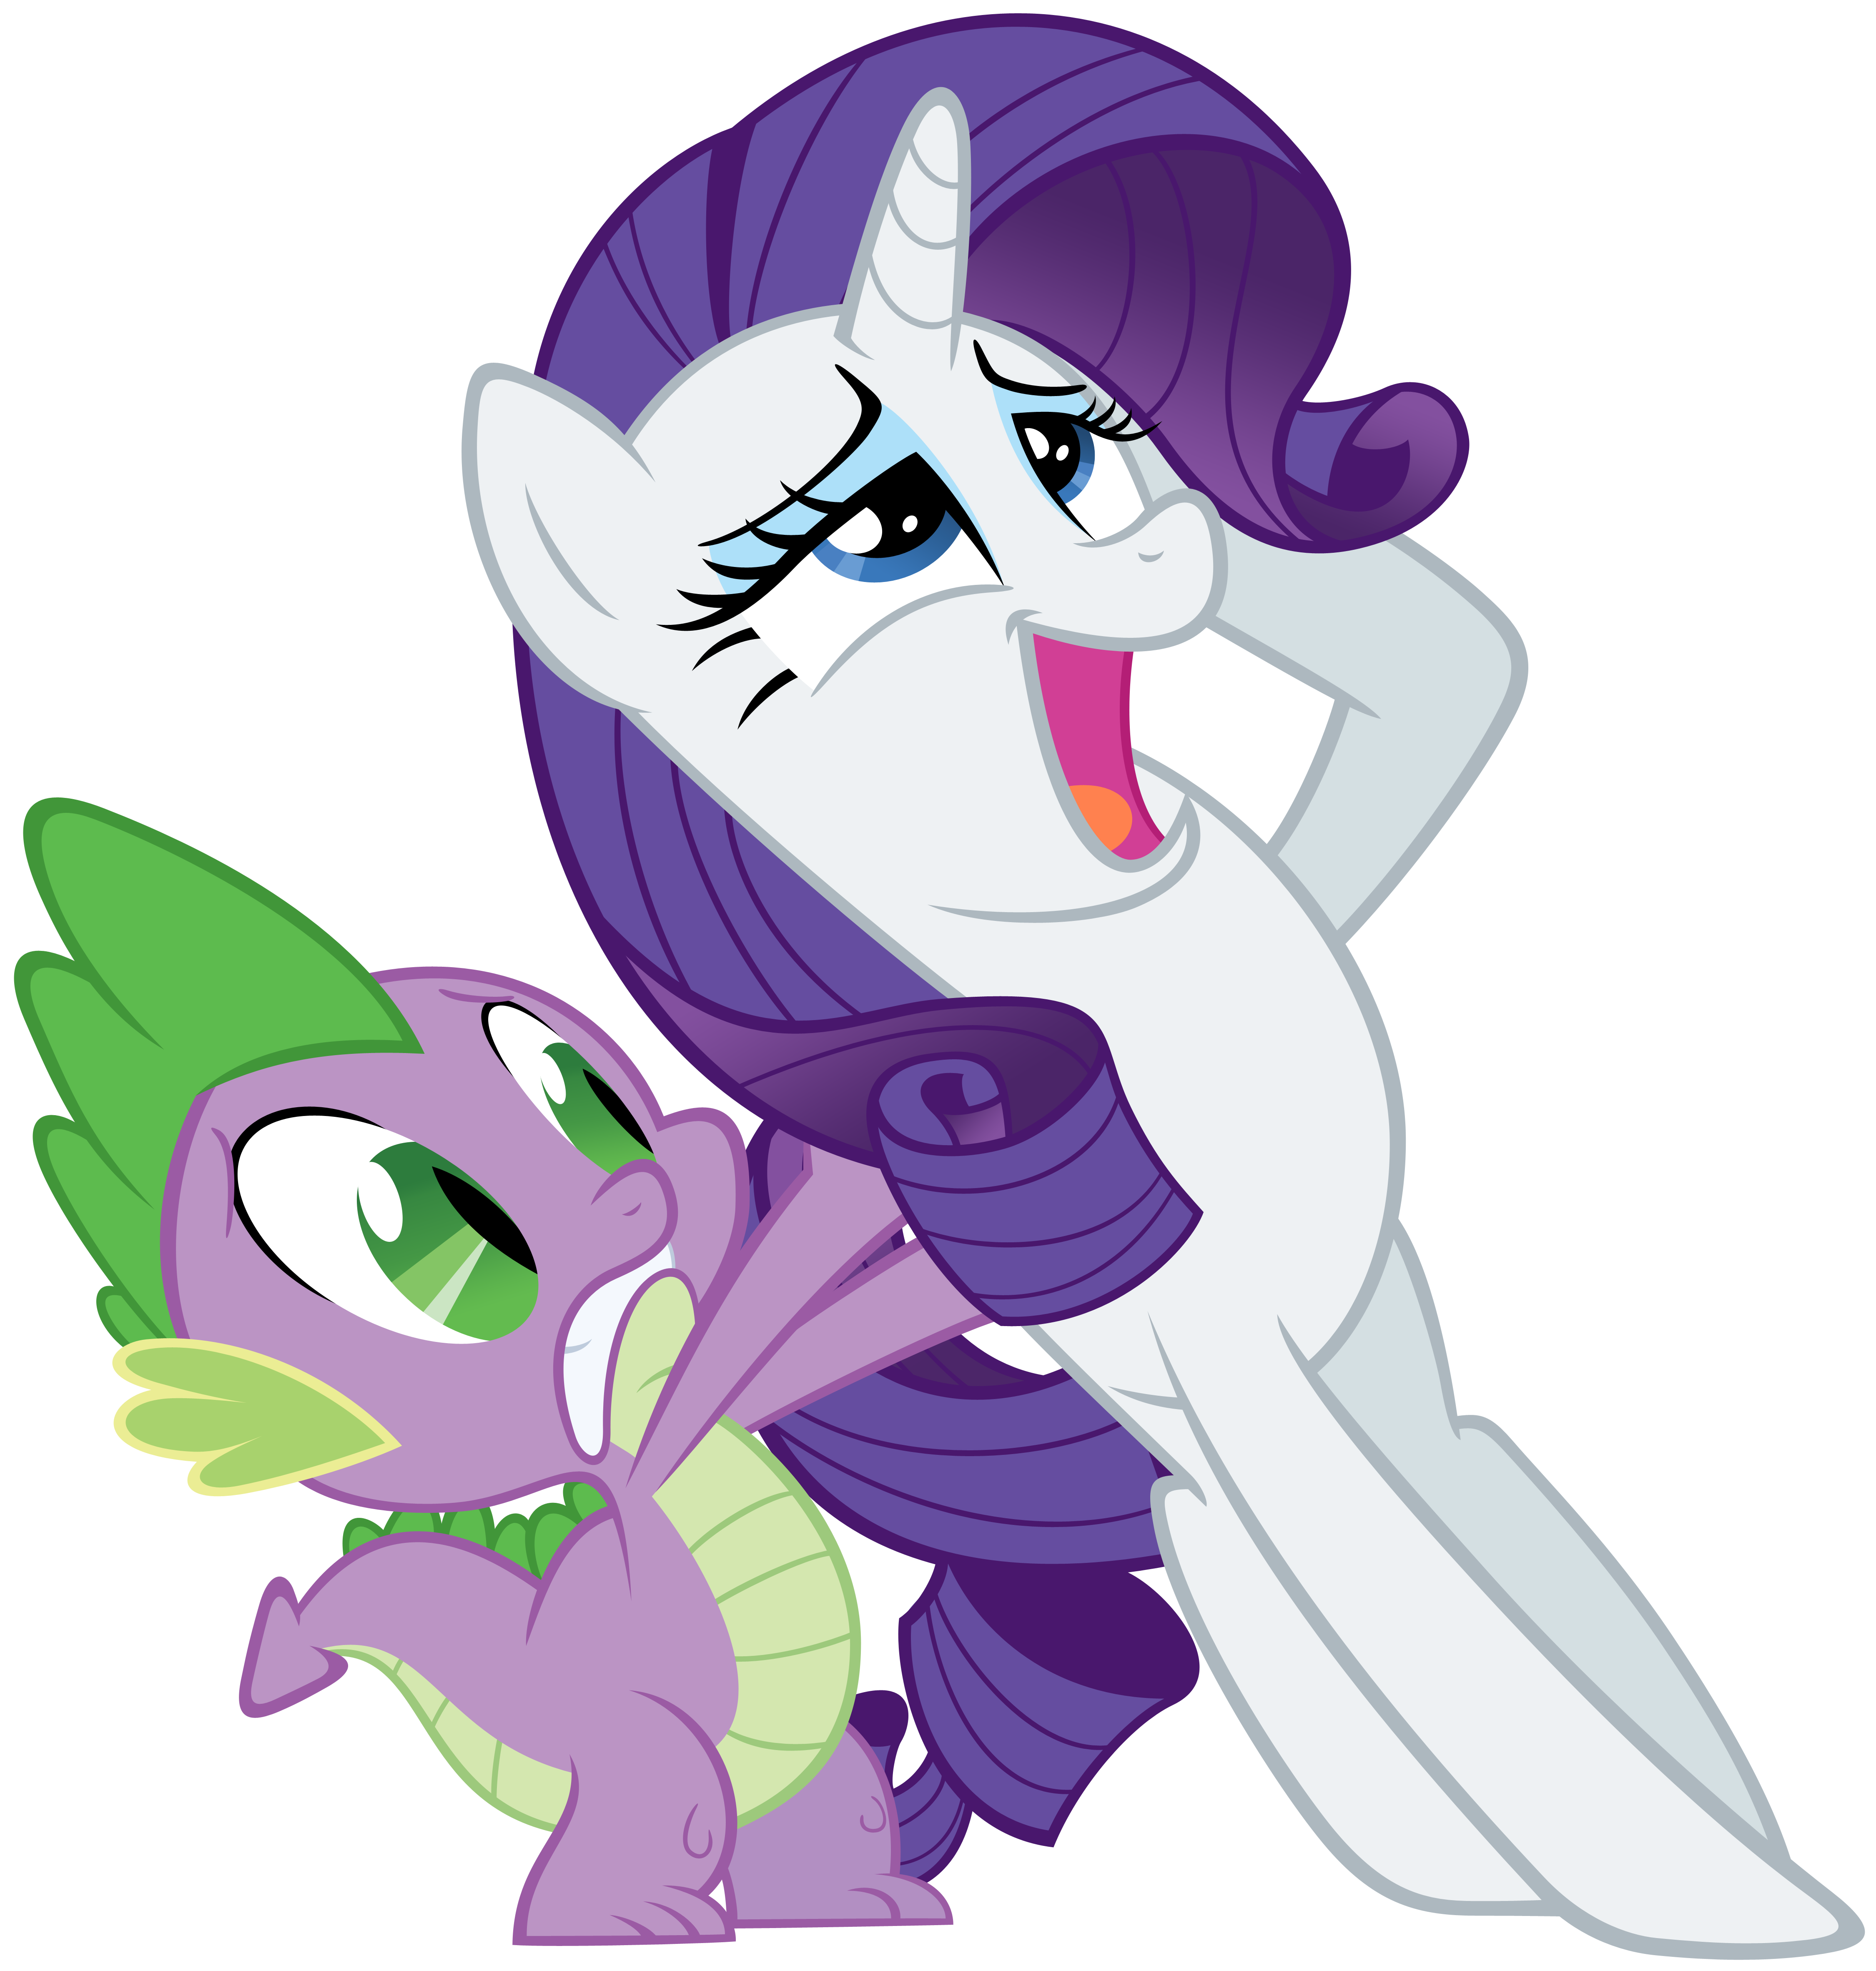 spike_and_swooning_rarity_by_stabzor-d4o4qmv.png